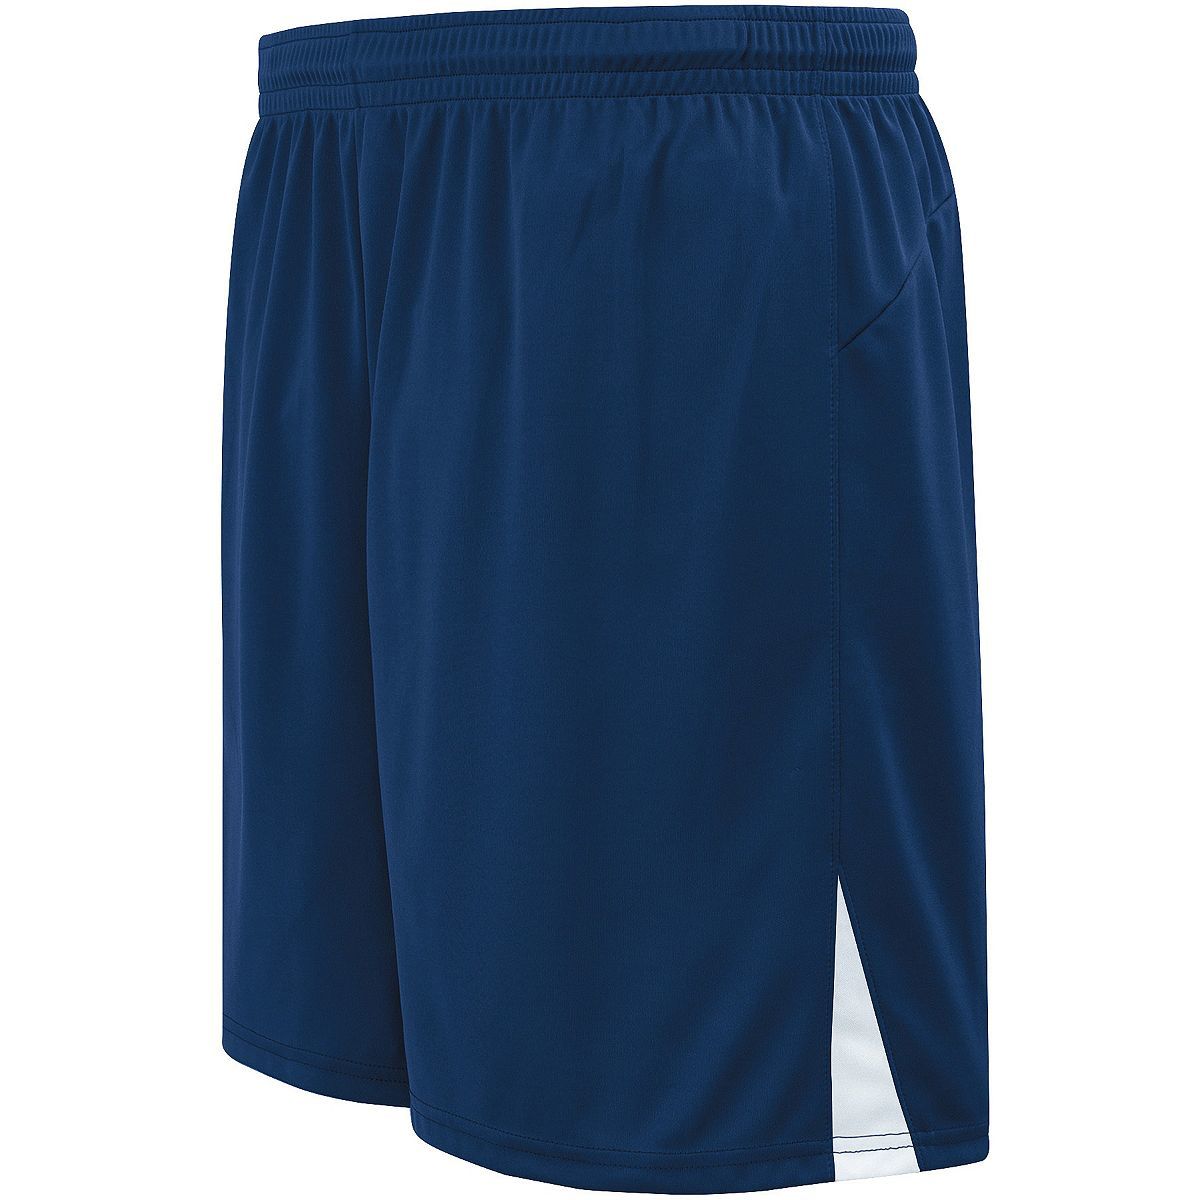 High 5 Hawk Shorts in Navy/White  -Part of the Adult, Adult-Shorts, High5-Products, Soccer, All-Sports-1 product lines at KanaleyCreations.com